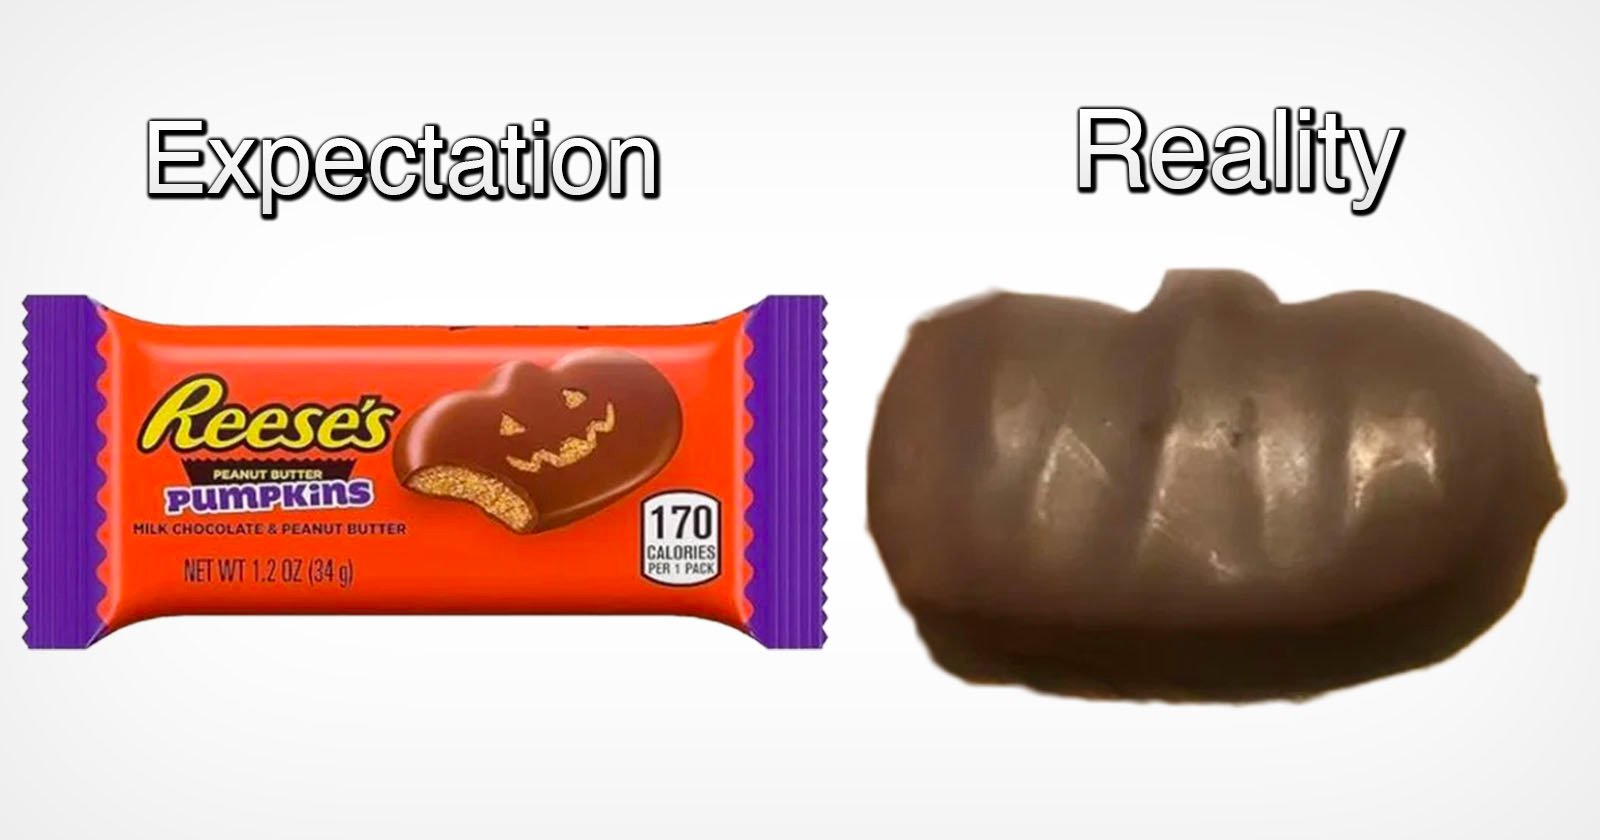 Woman Sues Reeses Chocolate For Misleading Photos on Packaging